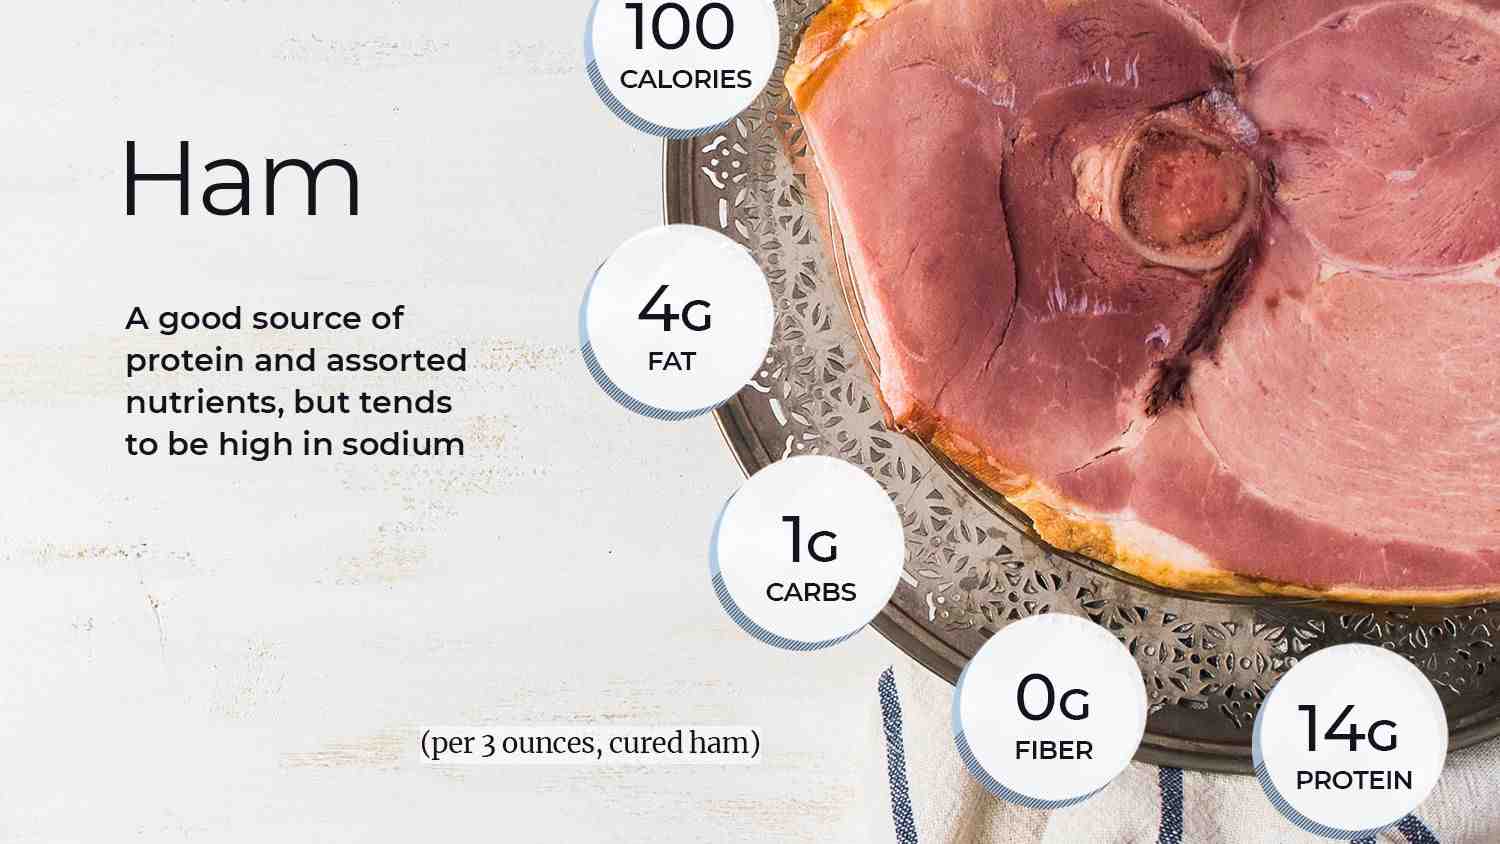 How long does boiled ham take to cook?